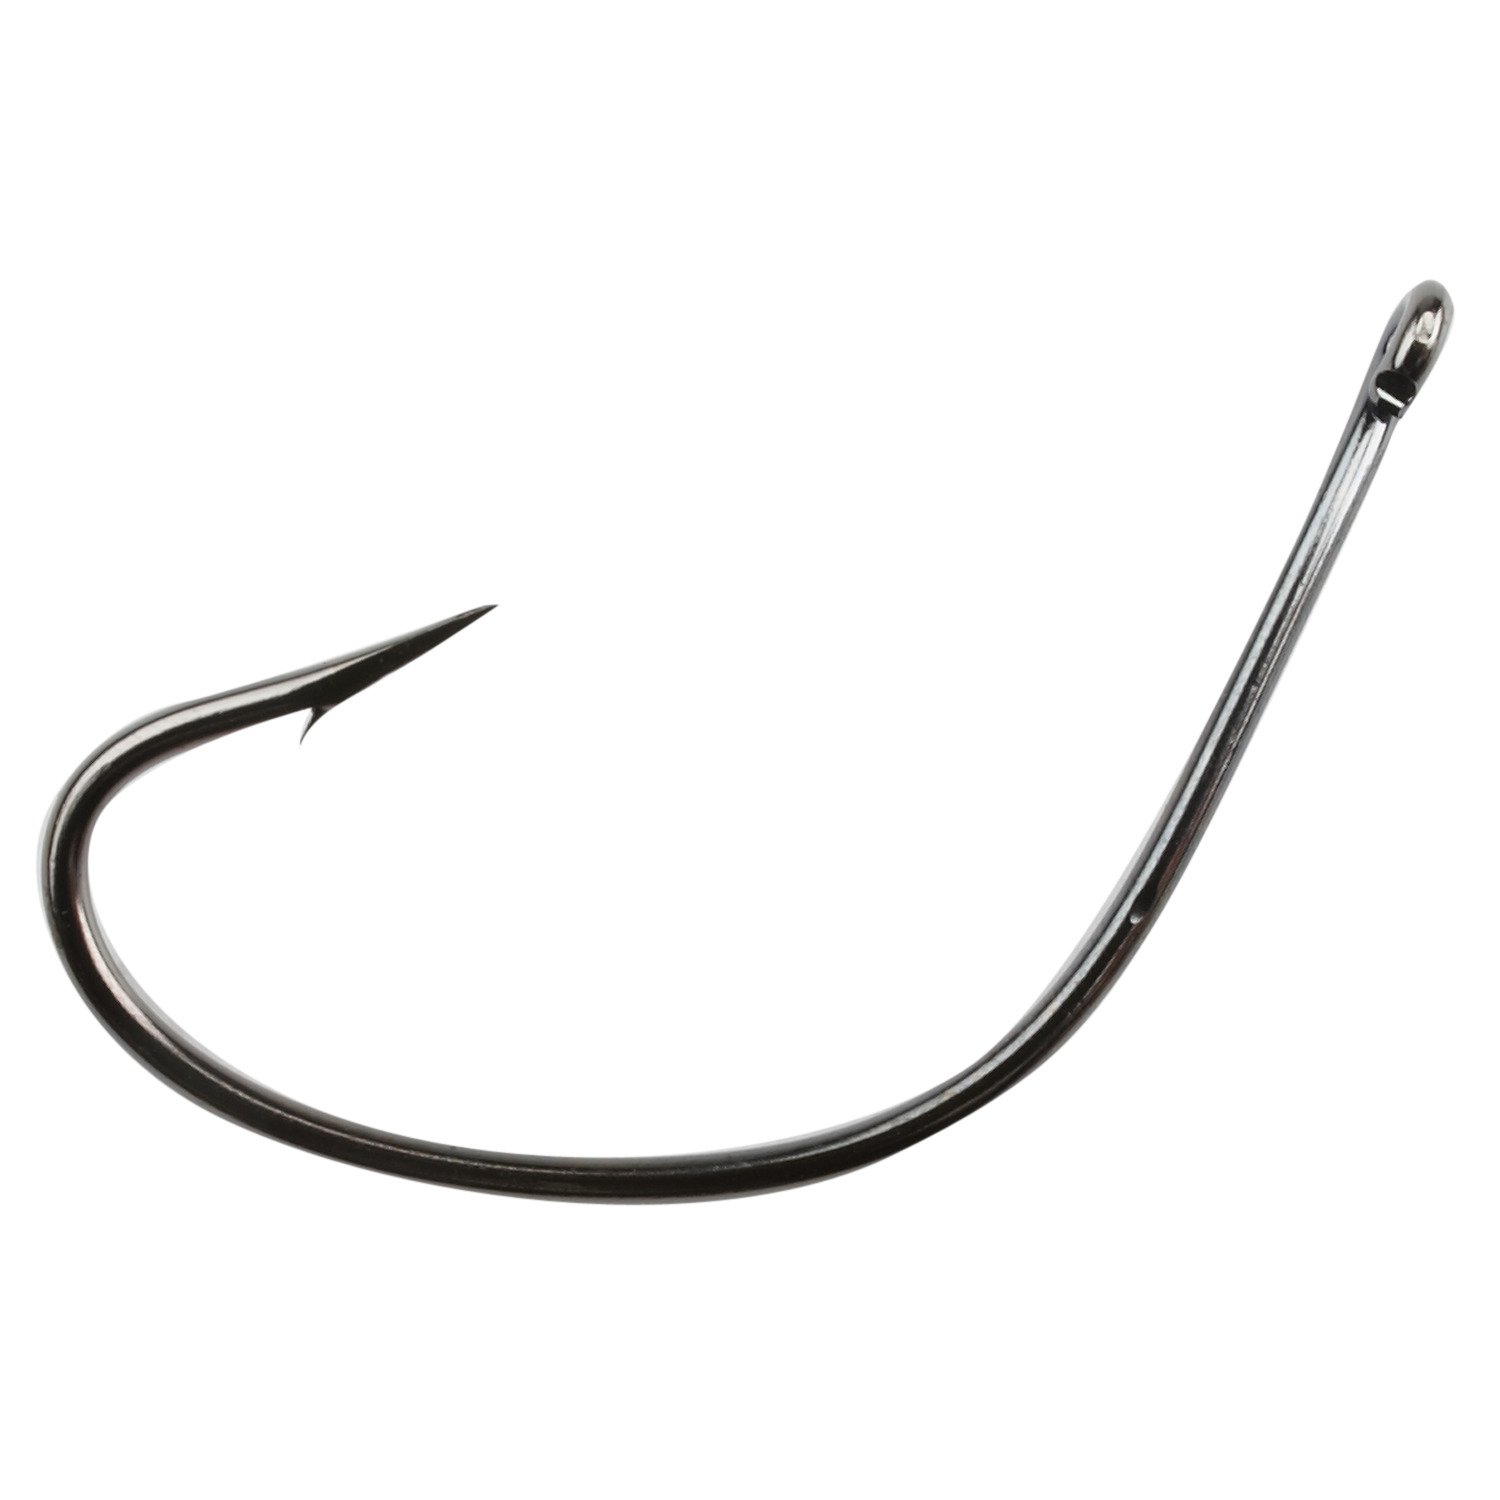 Academy Sports + Outdoors Eagle Claw Lazer Kahle Light Wire Offset